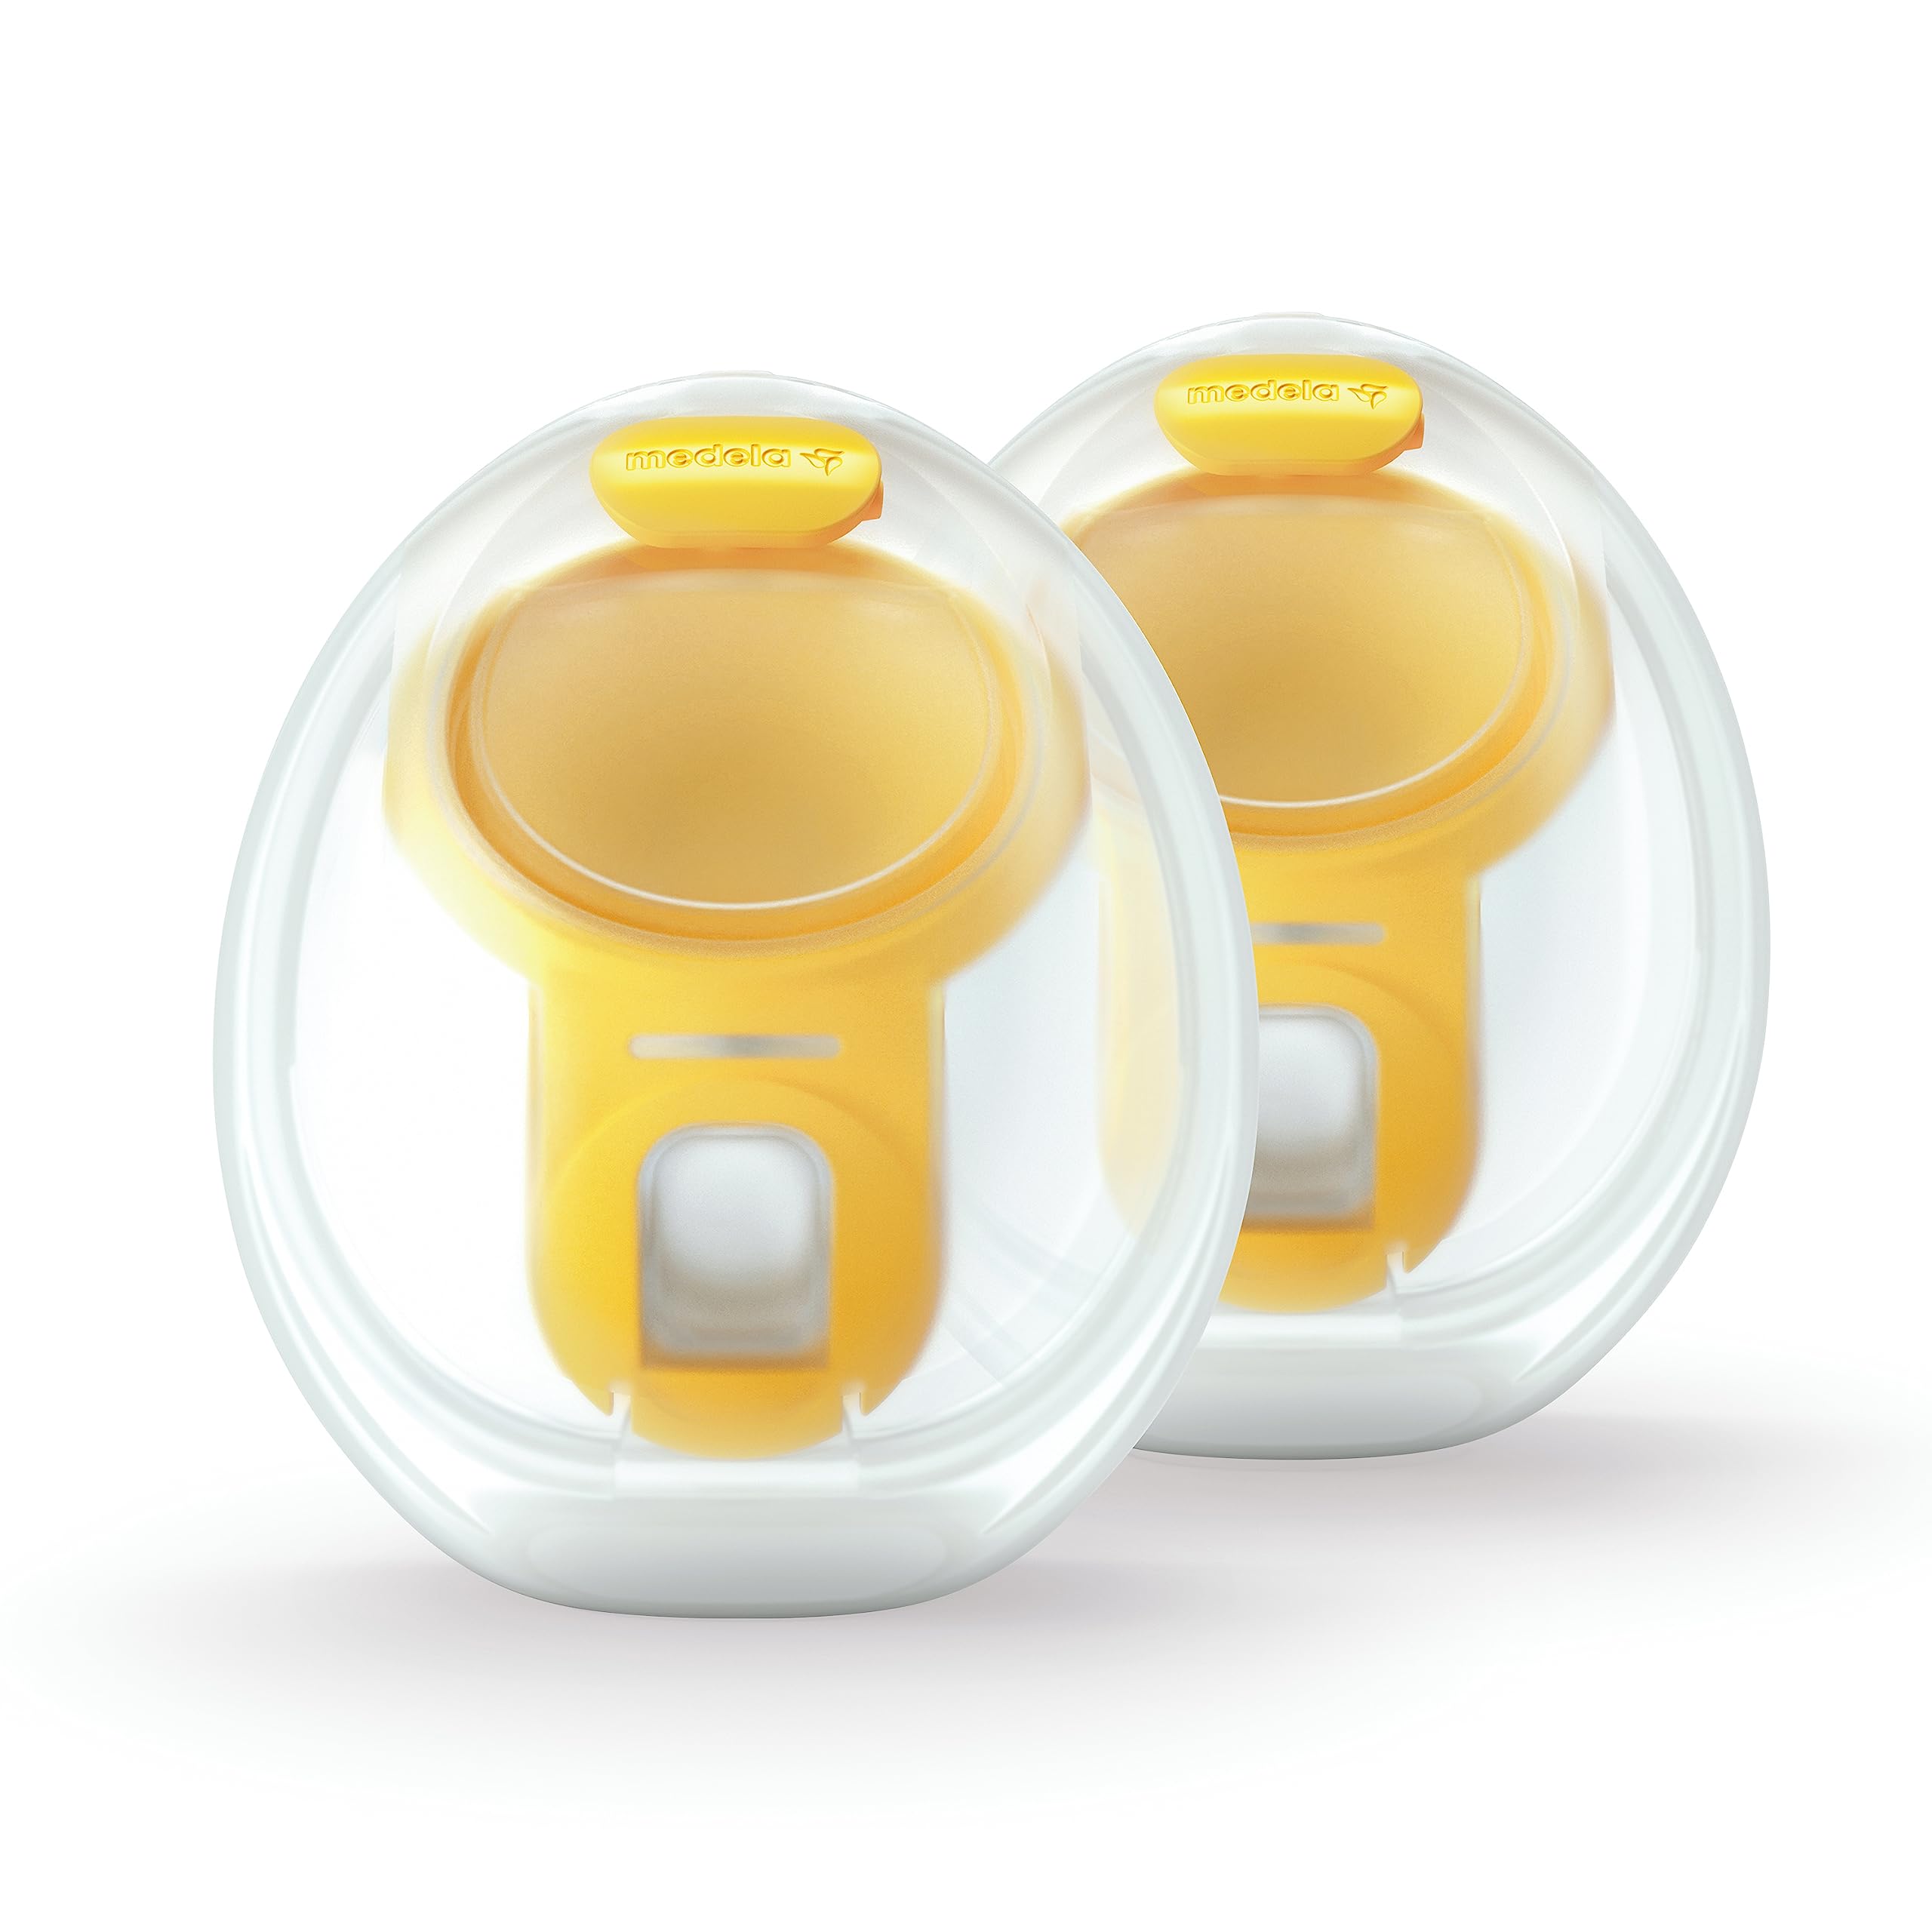 Medela Hands-Free Collection Cups, Compatible with Freestyle Flex & Breast Milk Collection and Storage Bottles, 6 Pack, 5 Ounce Breastmilk Container